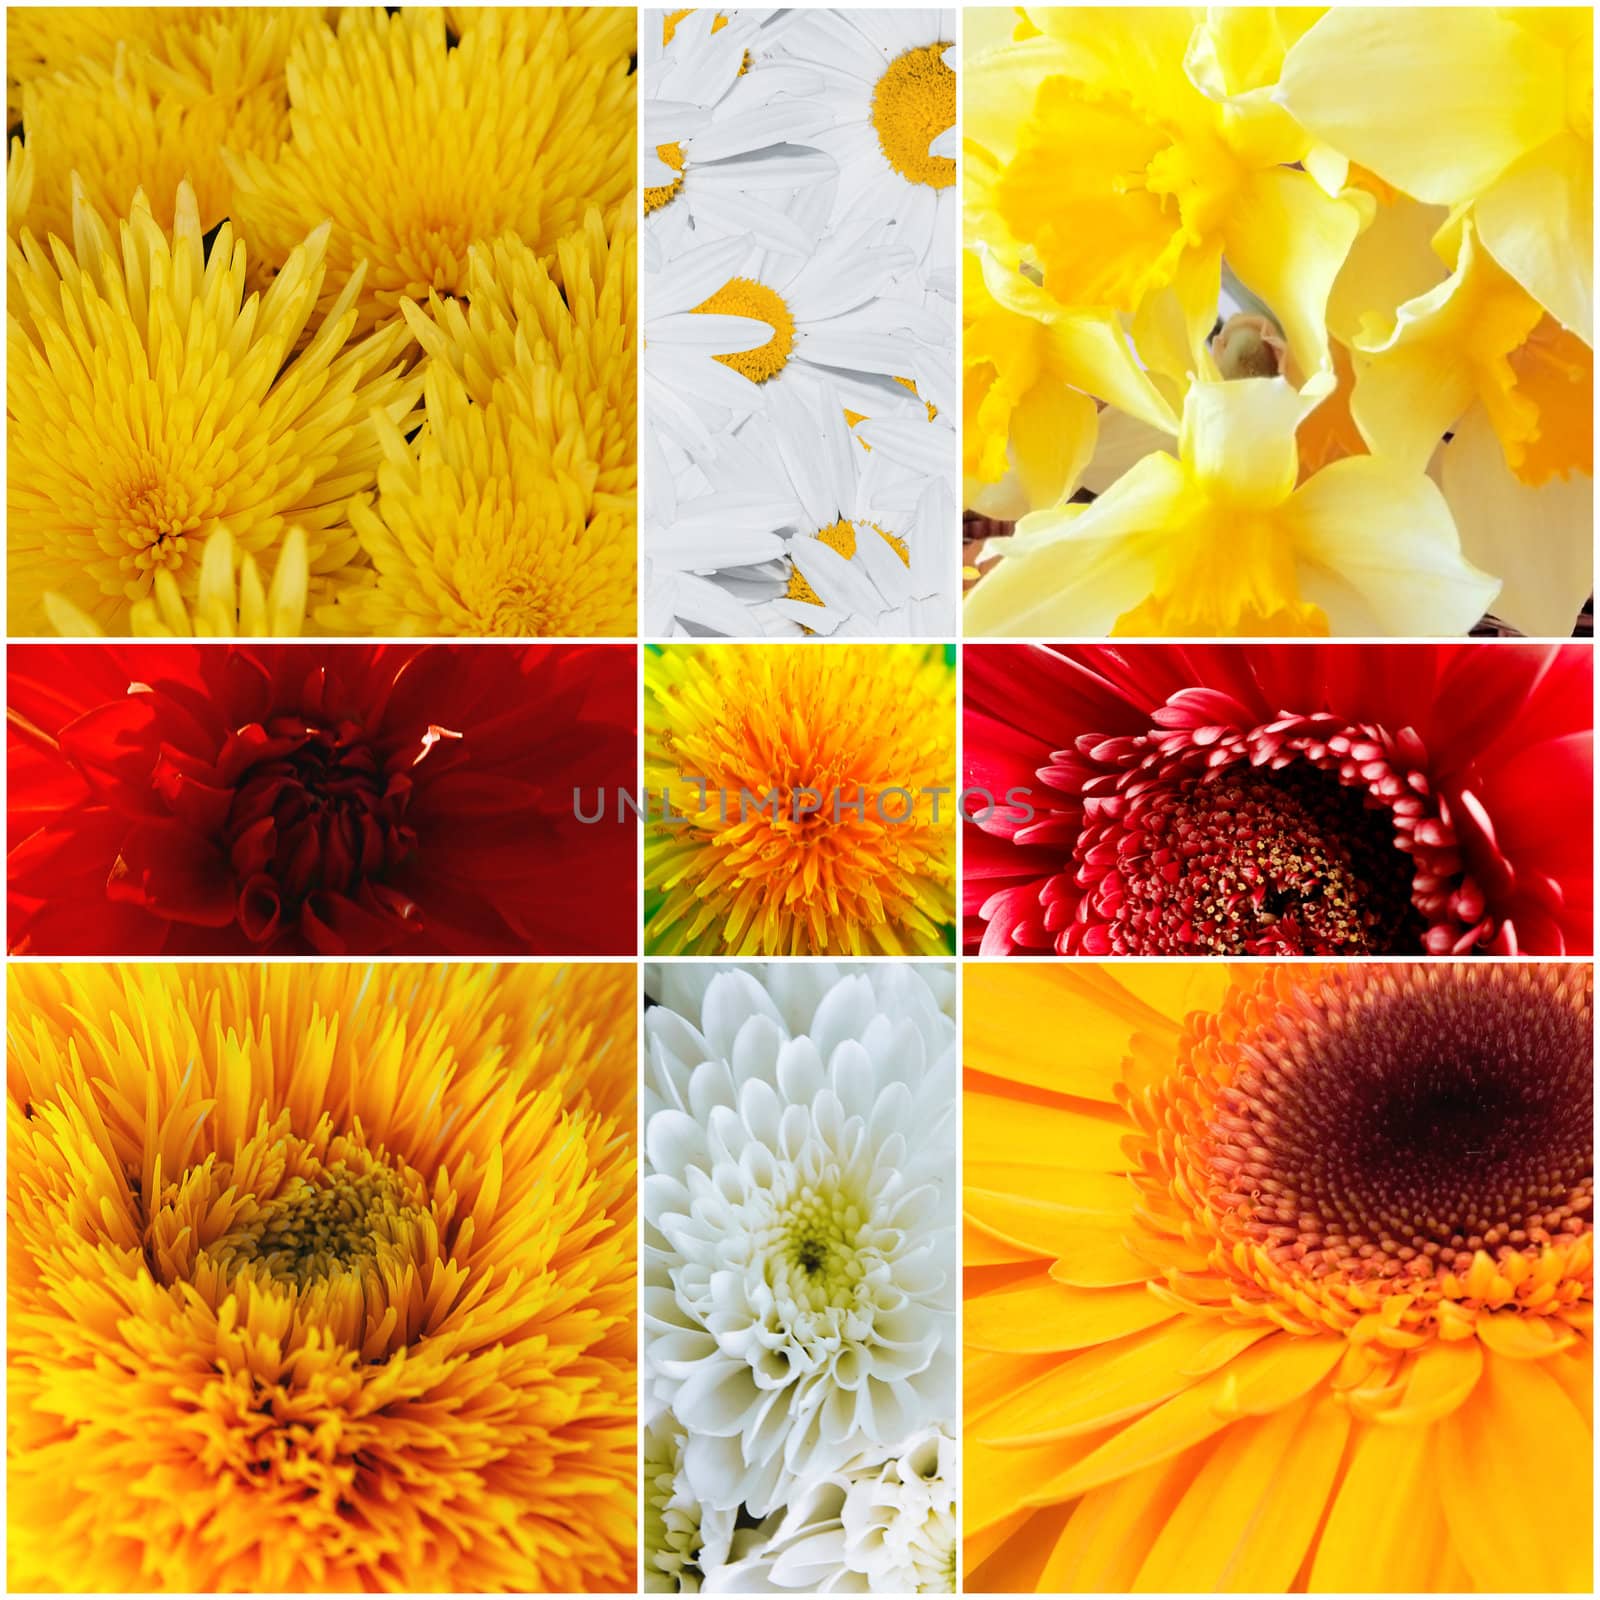 Yellow and red petals of gentle flowers